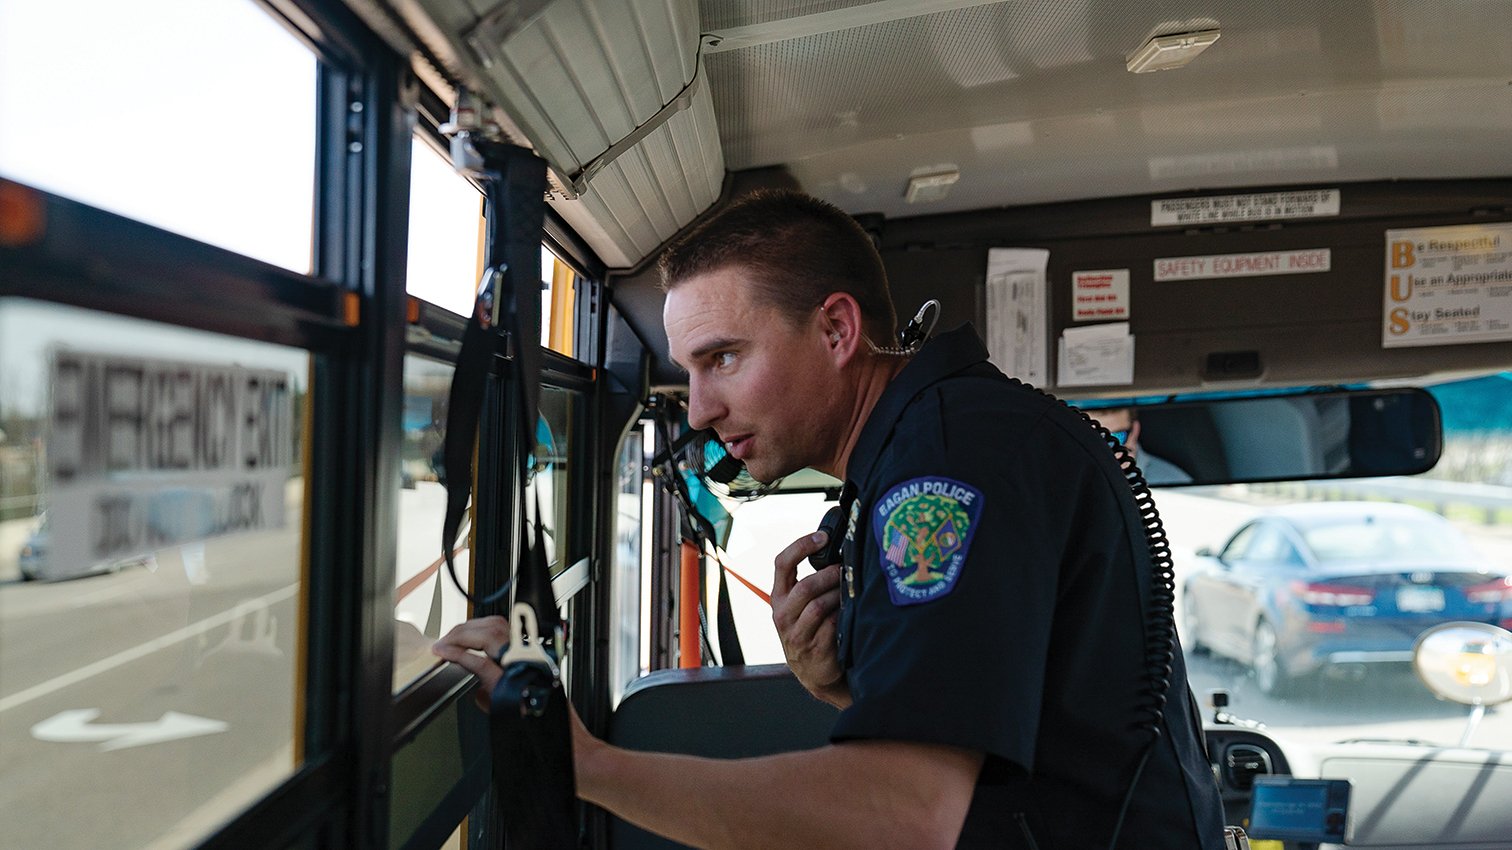 Police departments work to protect children through school bus safety